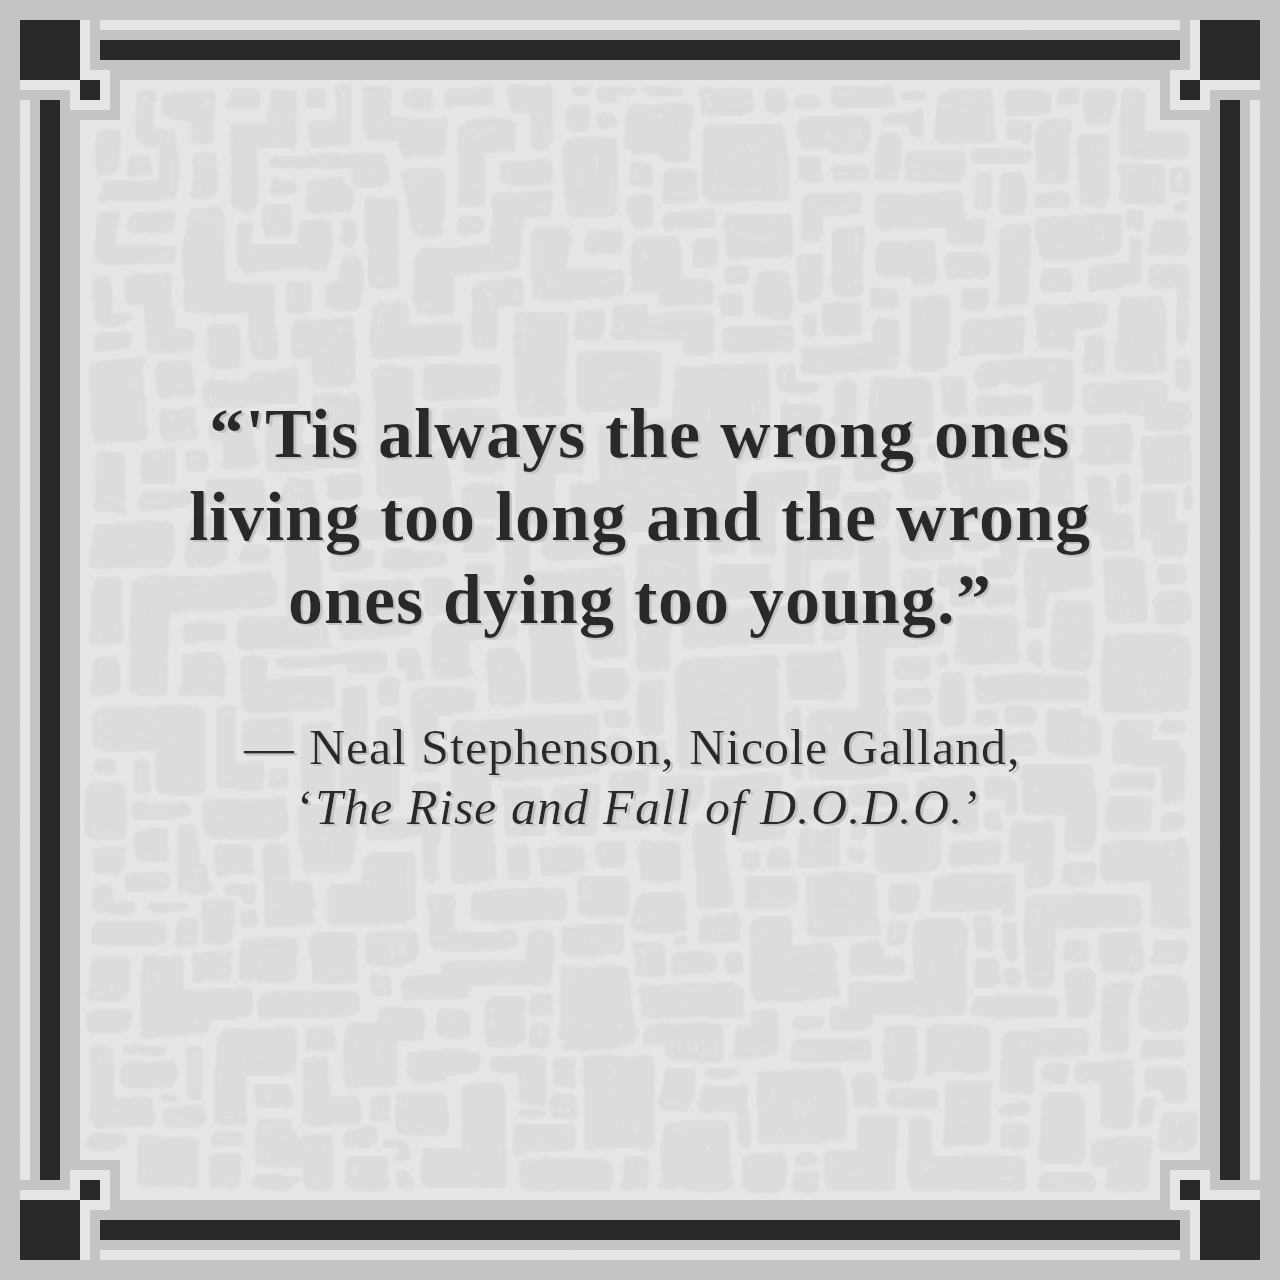 “'Tis always the wrong ones living too long and the wrong ones dying too young.”

— Neal Stephenson, Nicole Galland, ‘The Rise and Fall of D.O.D.O.’